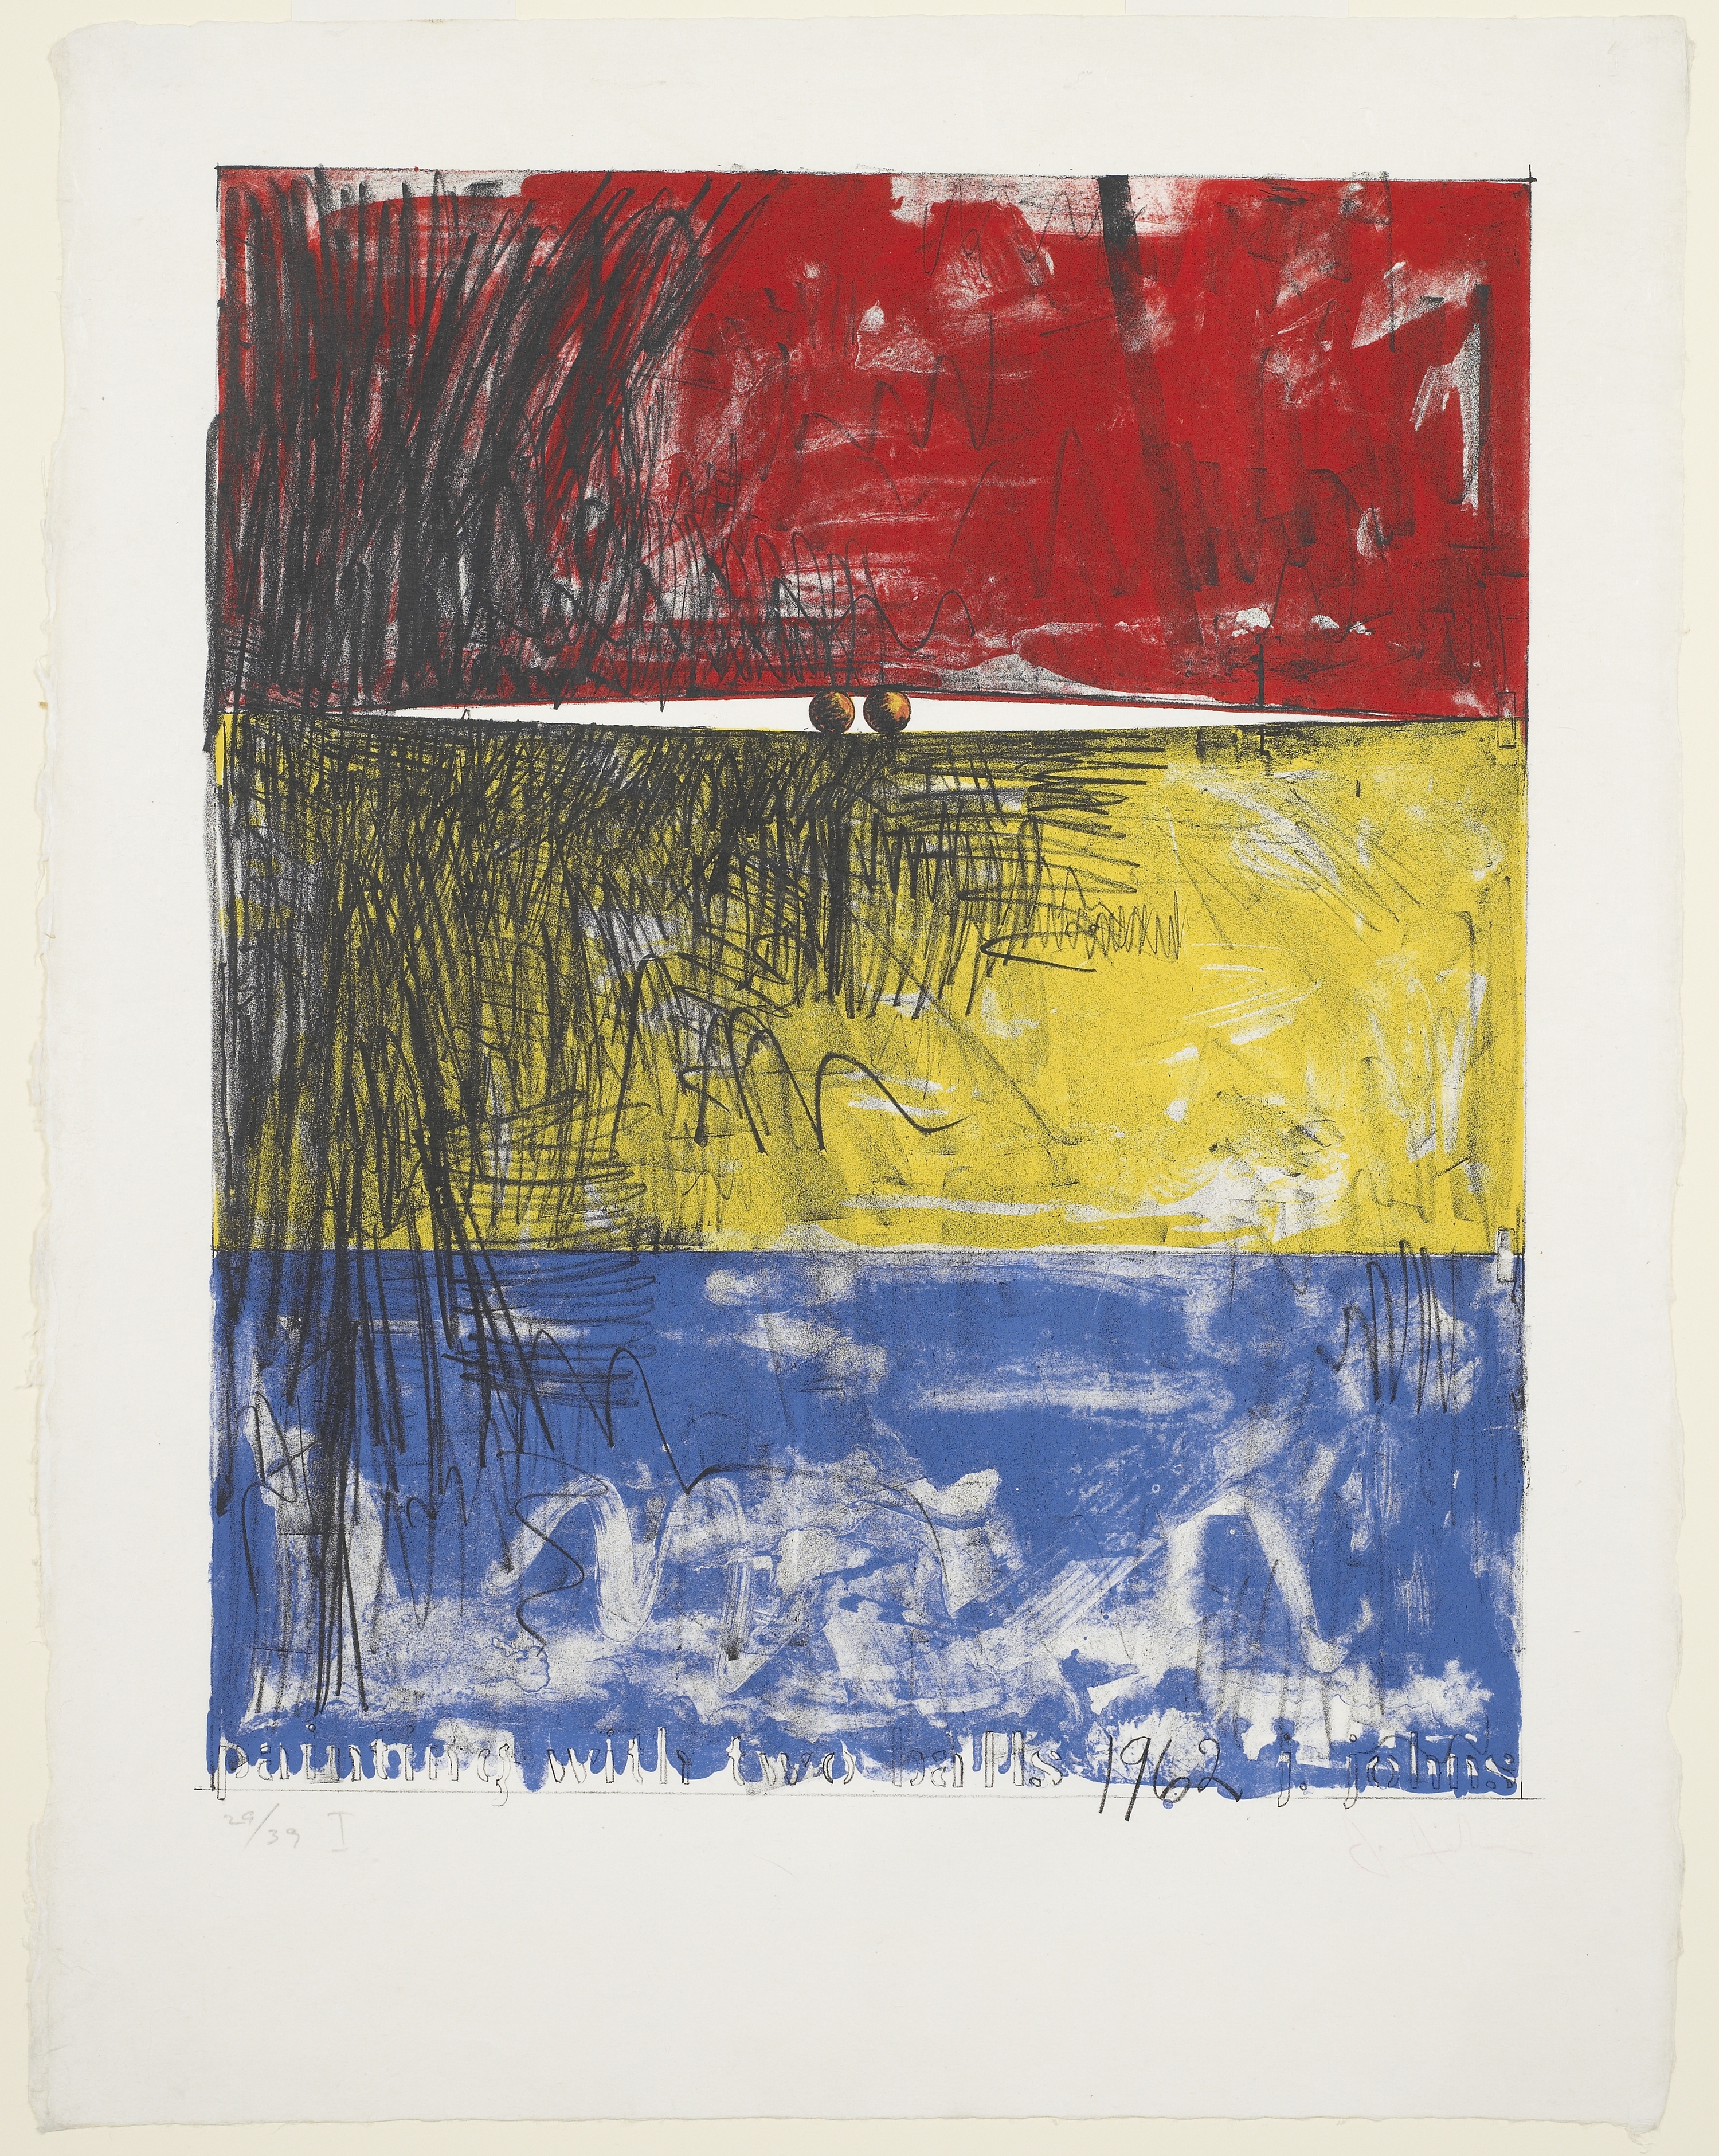 Jasper Johns, ‘Painting with Two Balls I,’ 1962. Color lithograph on handmade Kochi paper, 26 5/8 by 20 11/16in. (67.63 by 52.55cm). Minneapolis Institute of Art, Minneapolis, Minn. Gift of Thomas Edblom (P.79.150) © Jasper Johns / Licensed by VAGA at Artists Rights Society (ARS), NY 